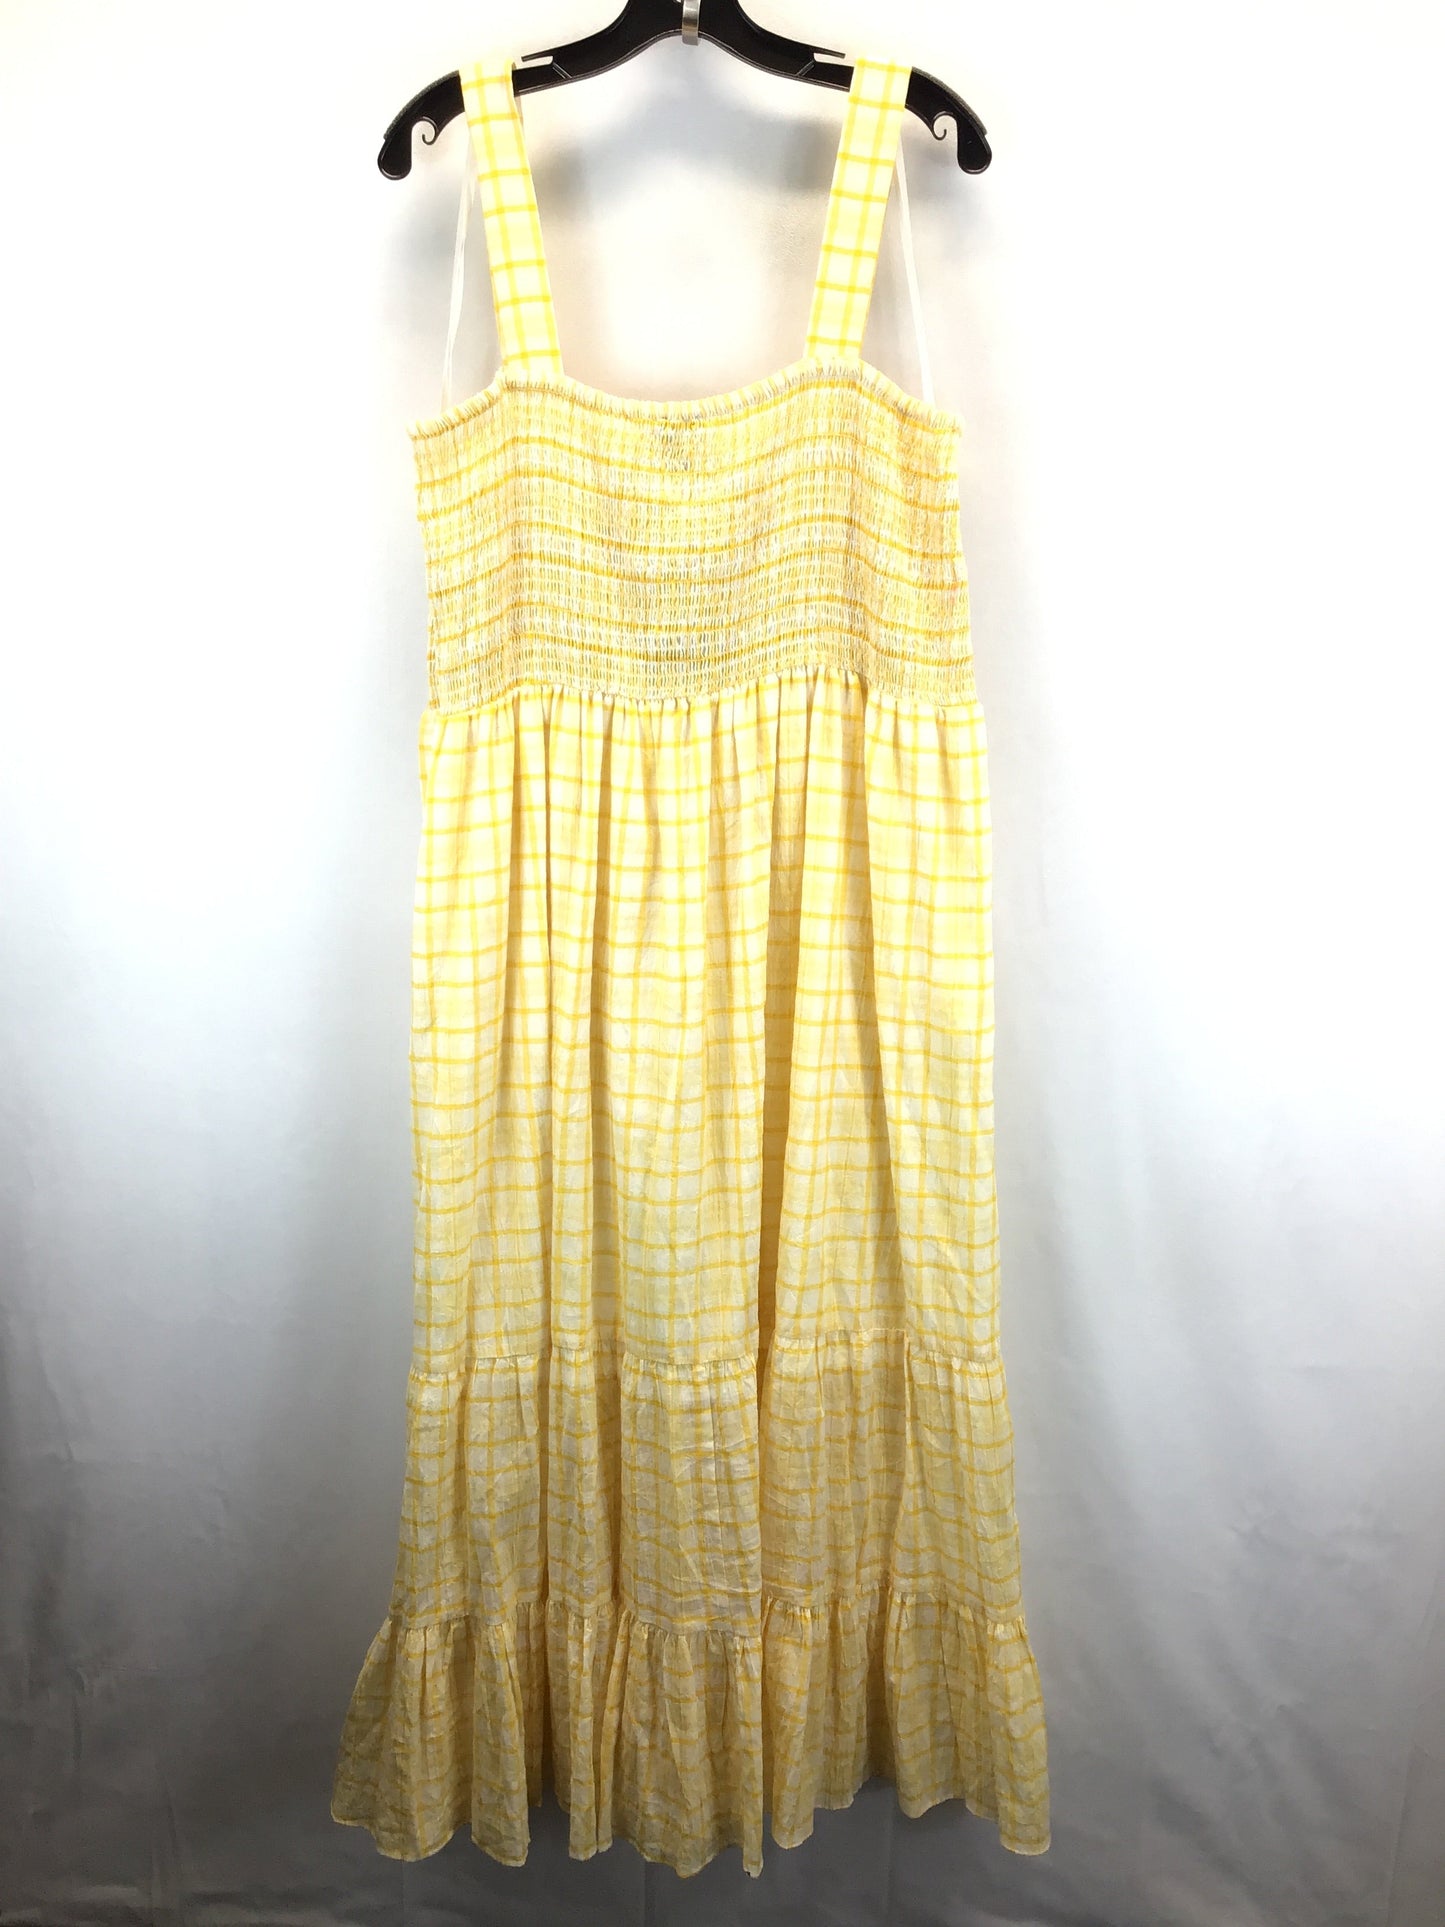 White & Yellow Dress Casual Maxi Tommy Hilfiger, Size 2x